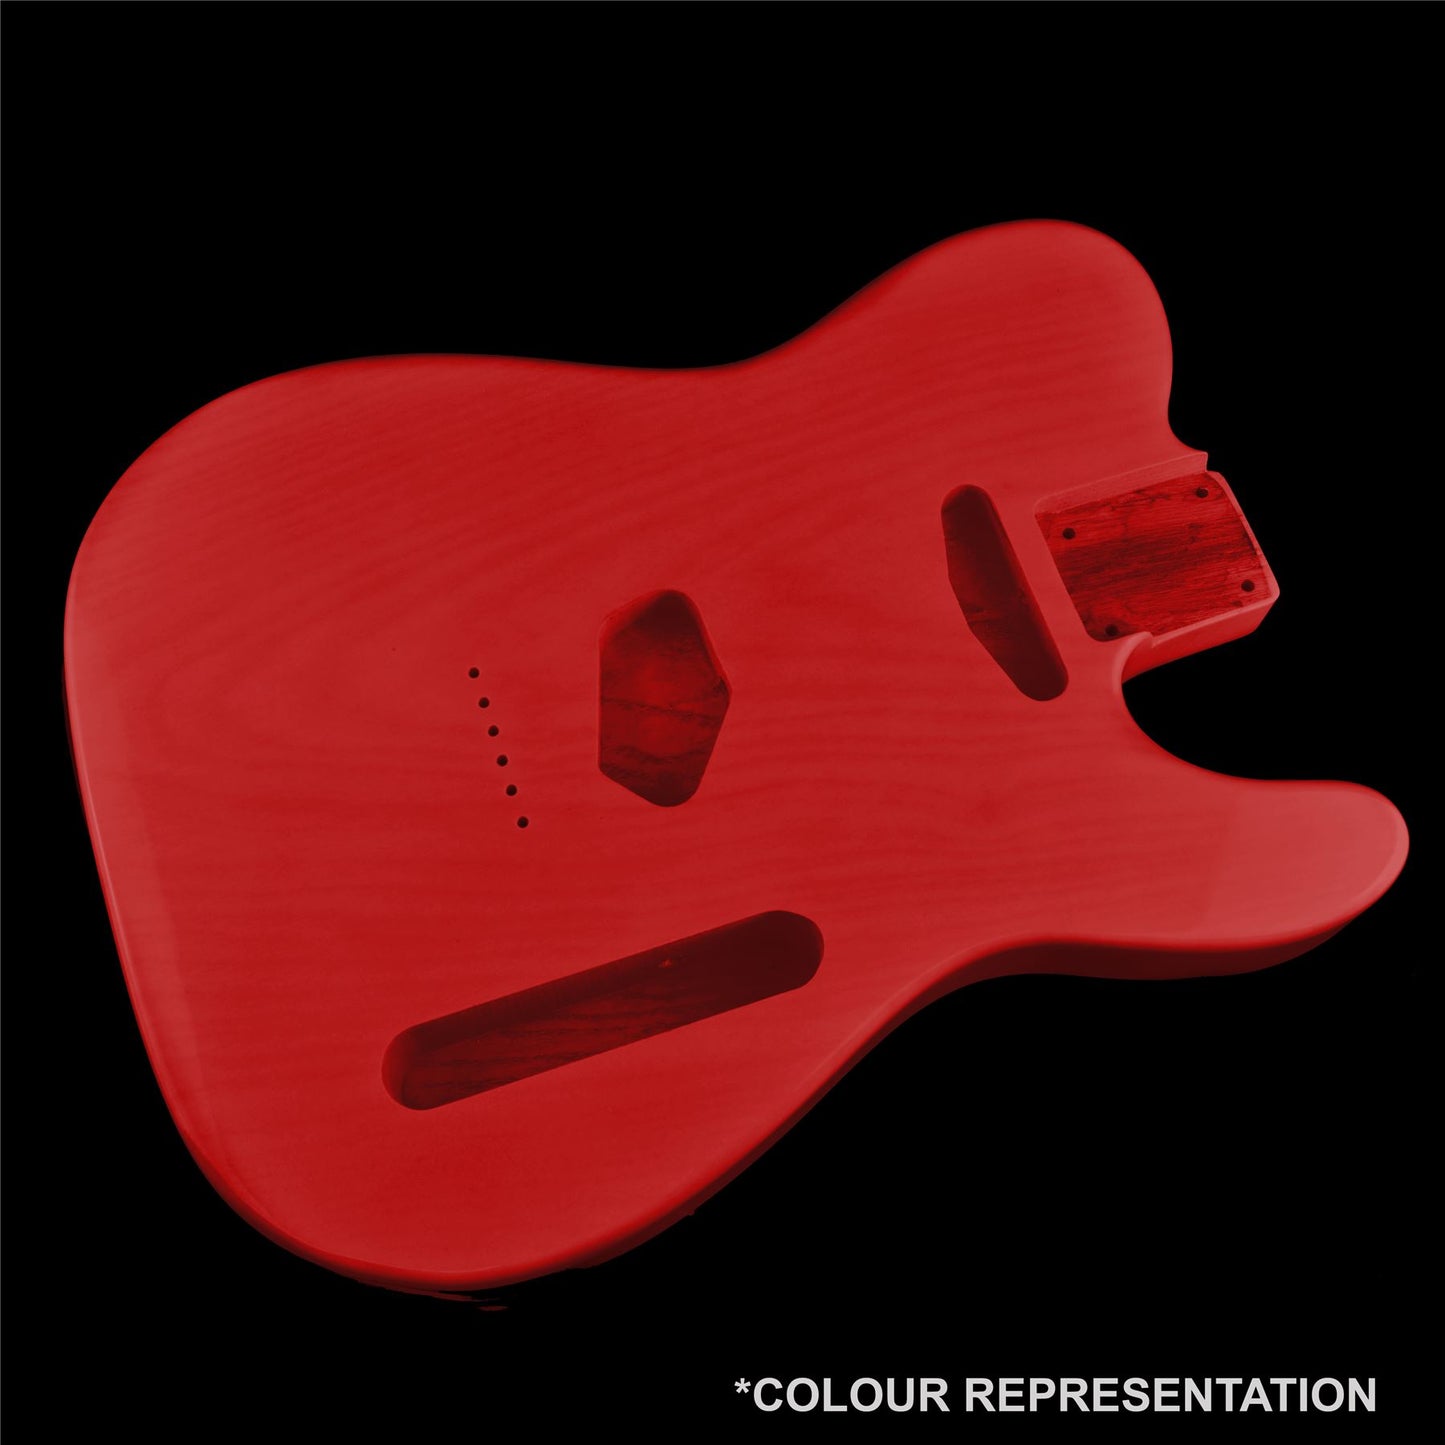 Translucent Red Nitrocellulose Guitar Paint / Lacquer 400ml